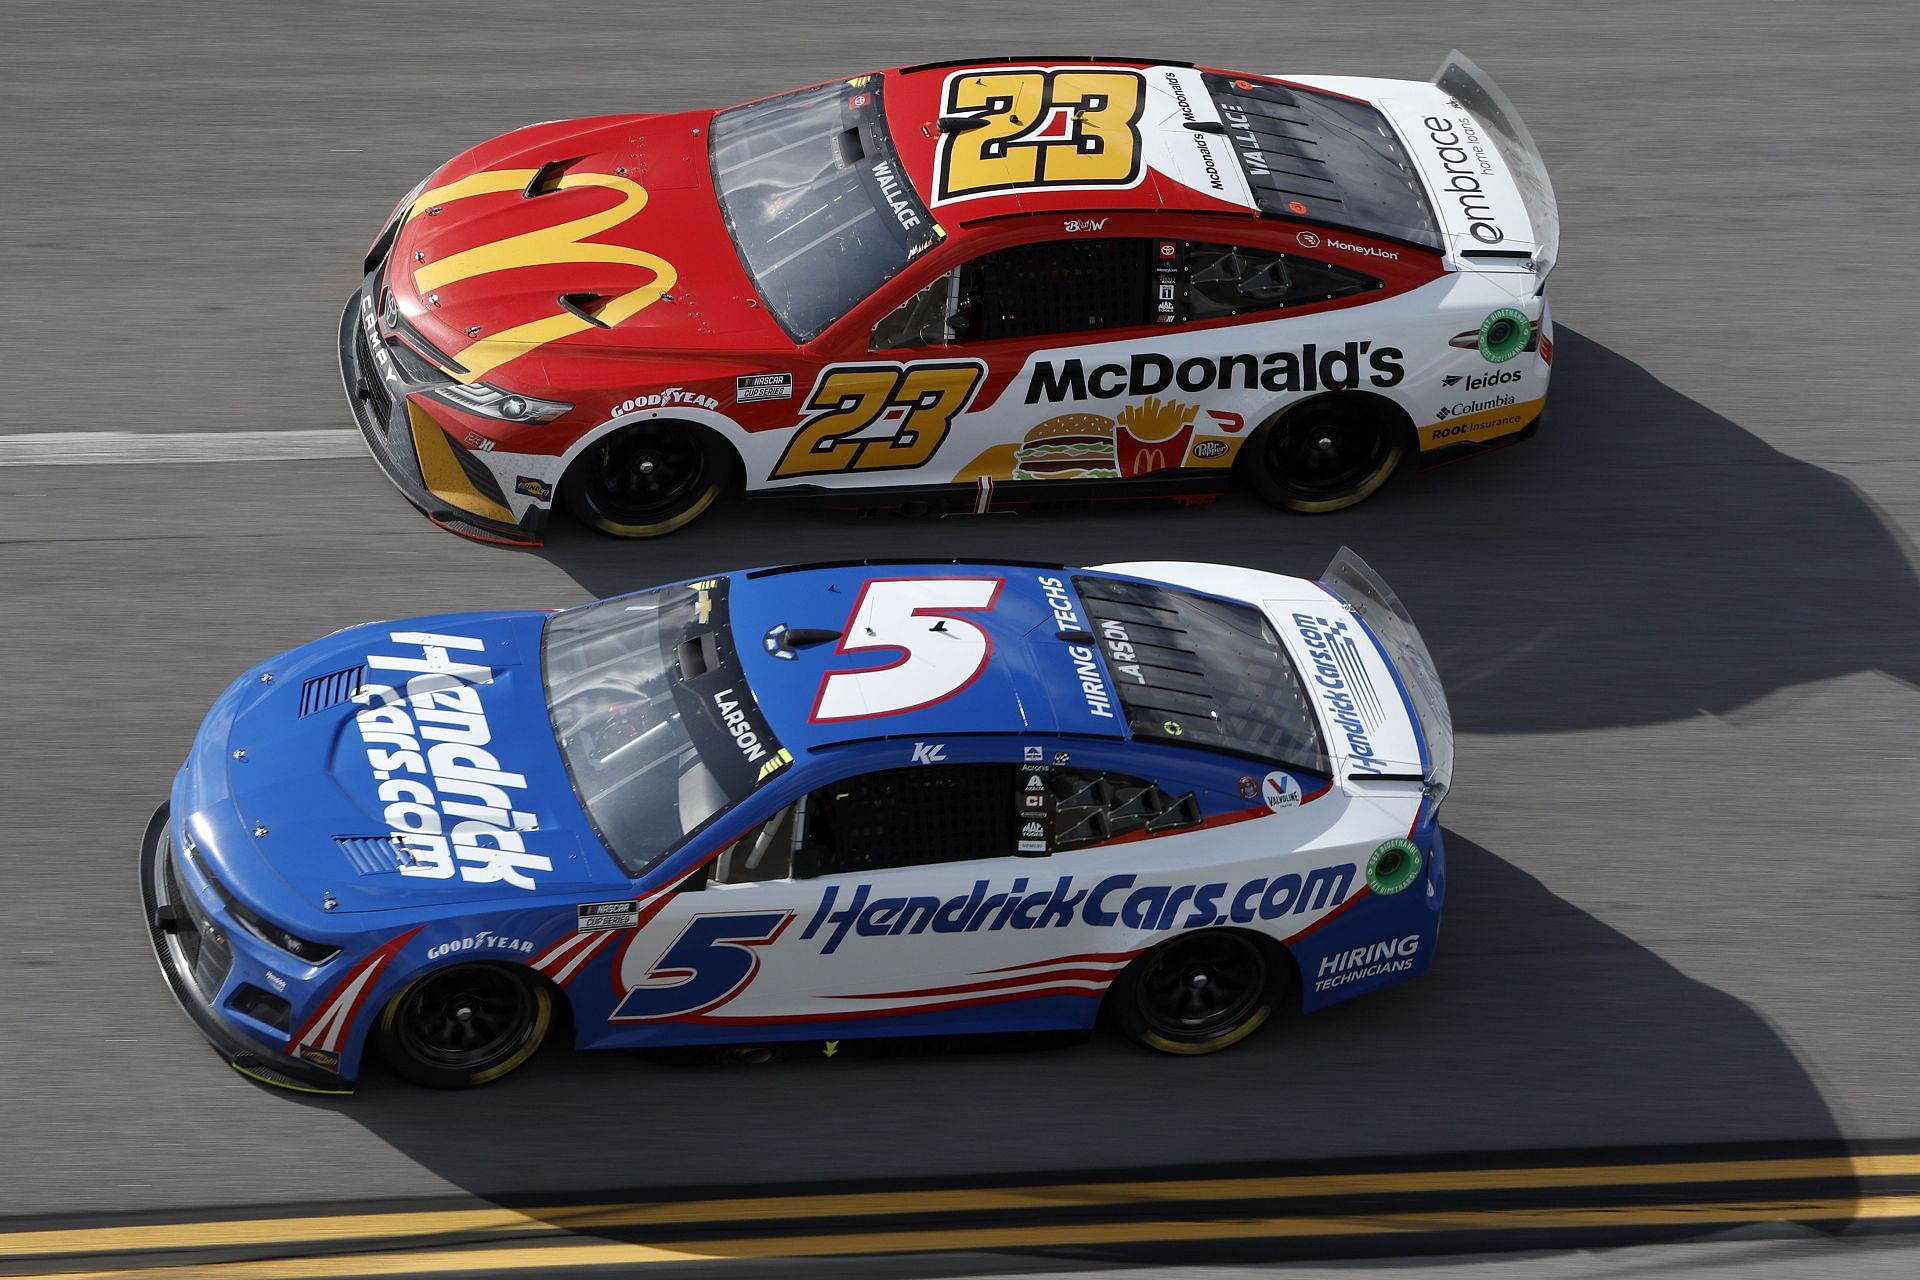 Kyle Larson in the #5 Chevrolet and Bubba Wallace in the #23 Toyota seen racing during the 2022 NASCAR Cup Series GEICO 500 at Talladega Superspeedway in Alabama (Photo by Sean Gardner/Getty Images)